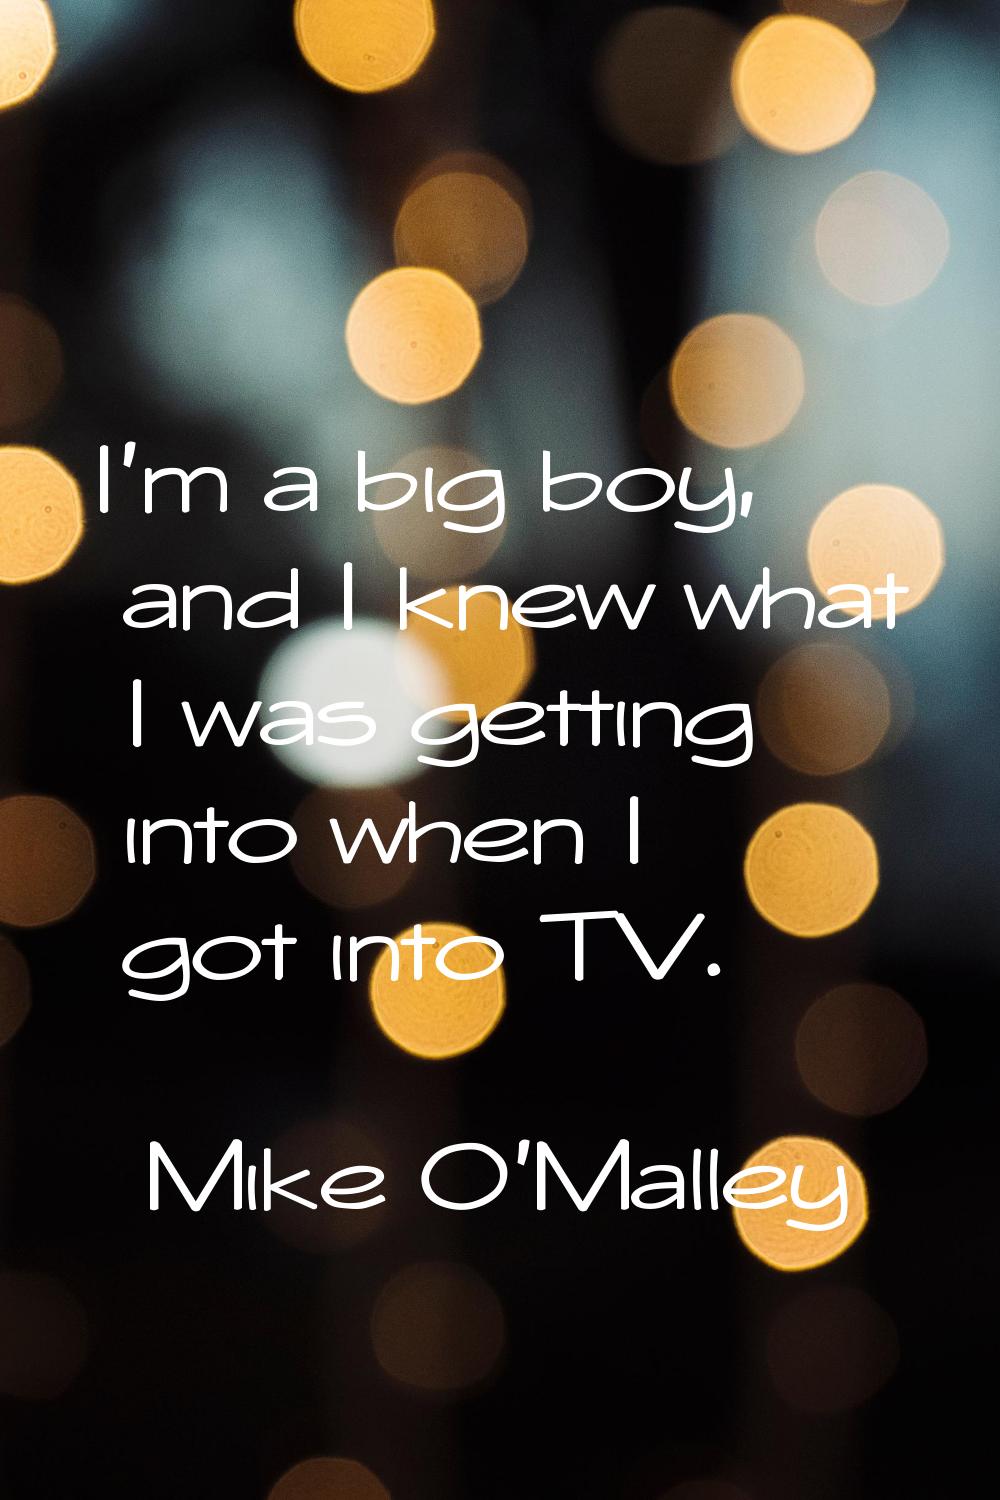 I'm a big boy, and I knew what I was getting into when I got into TV.